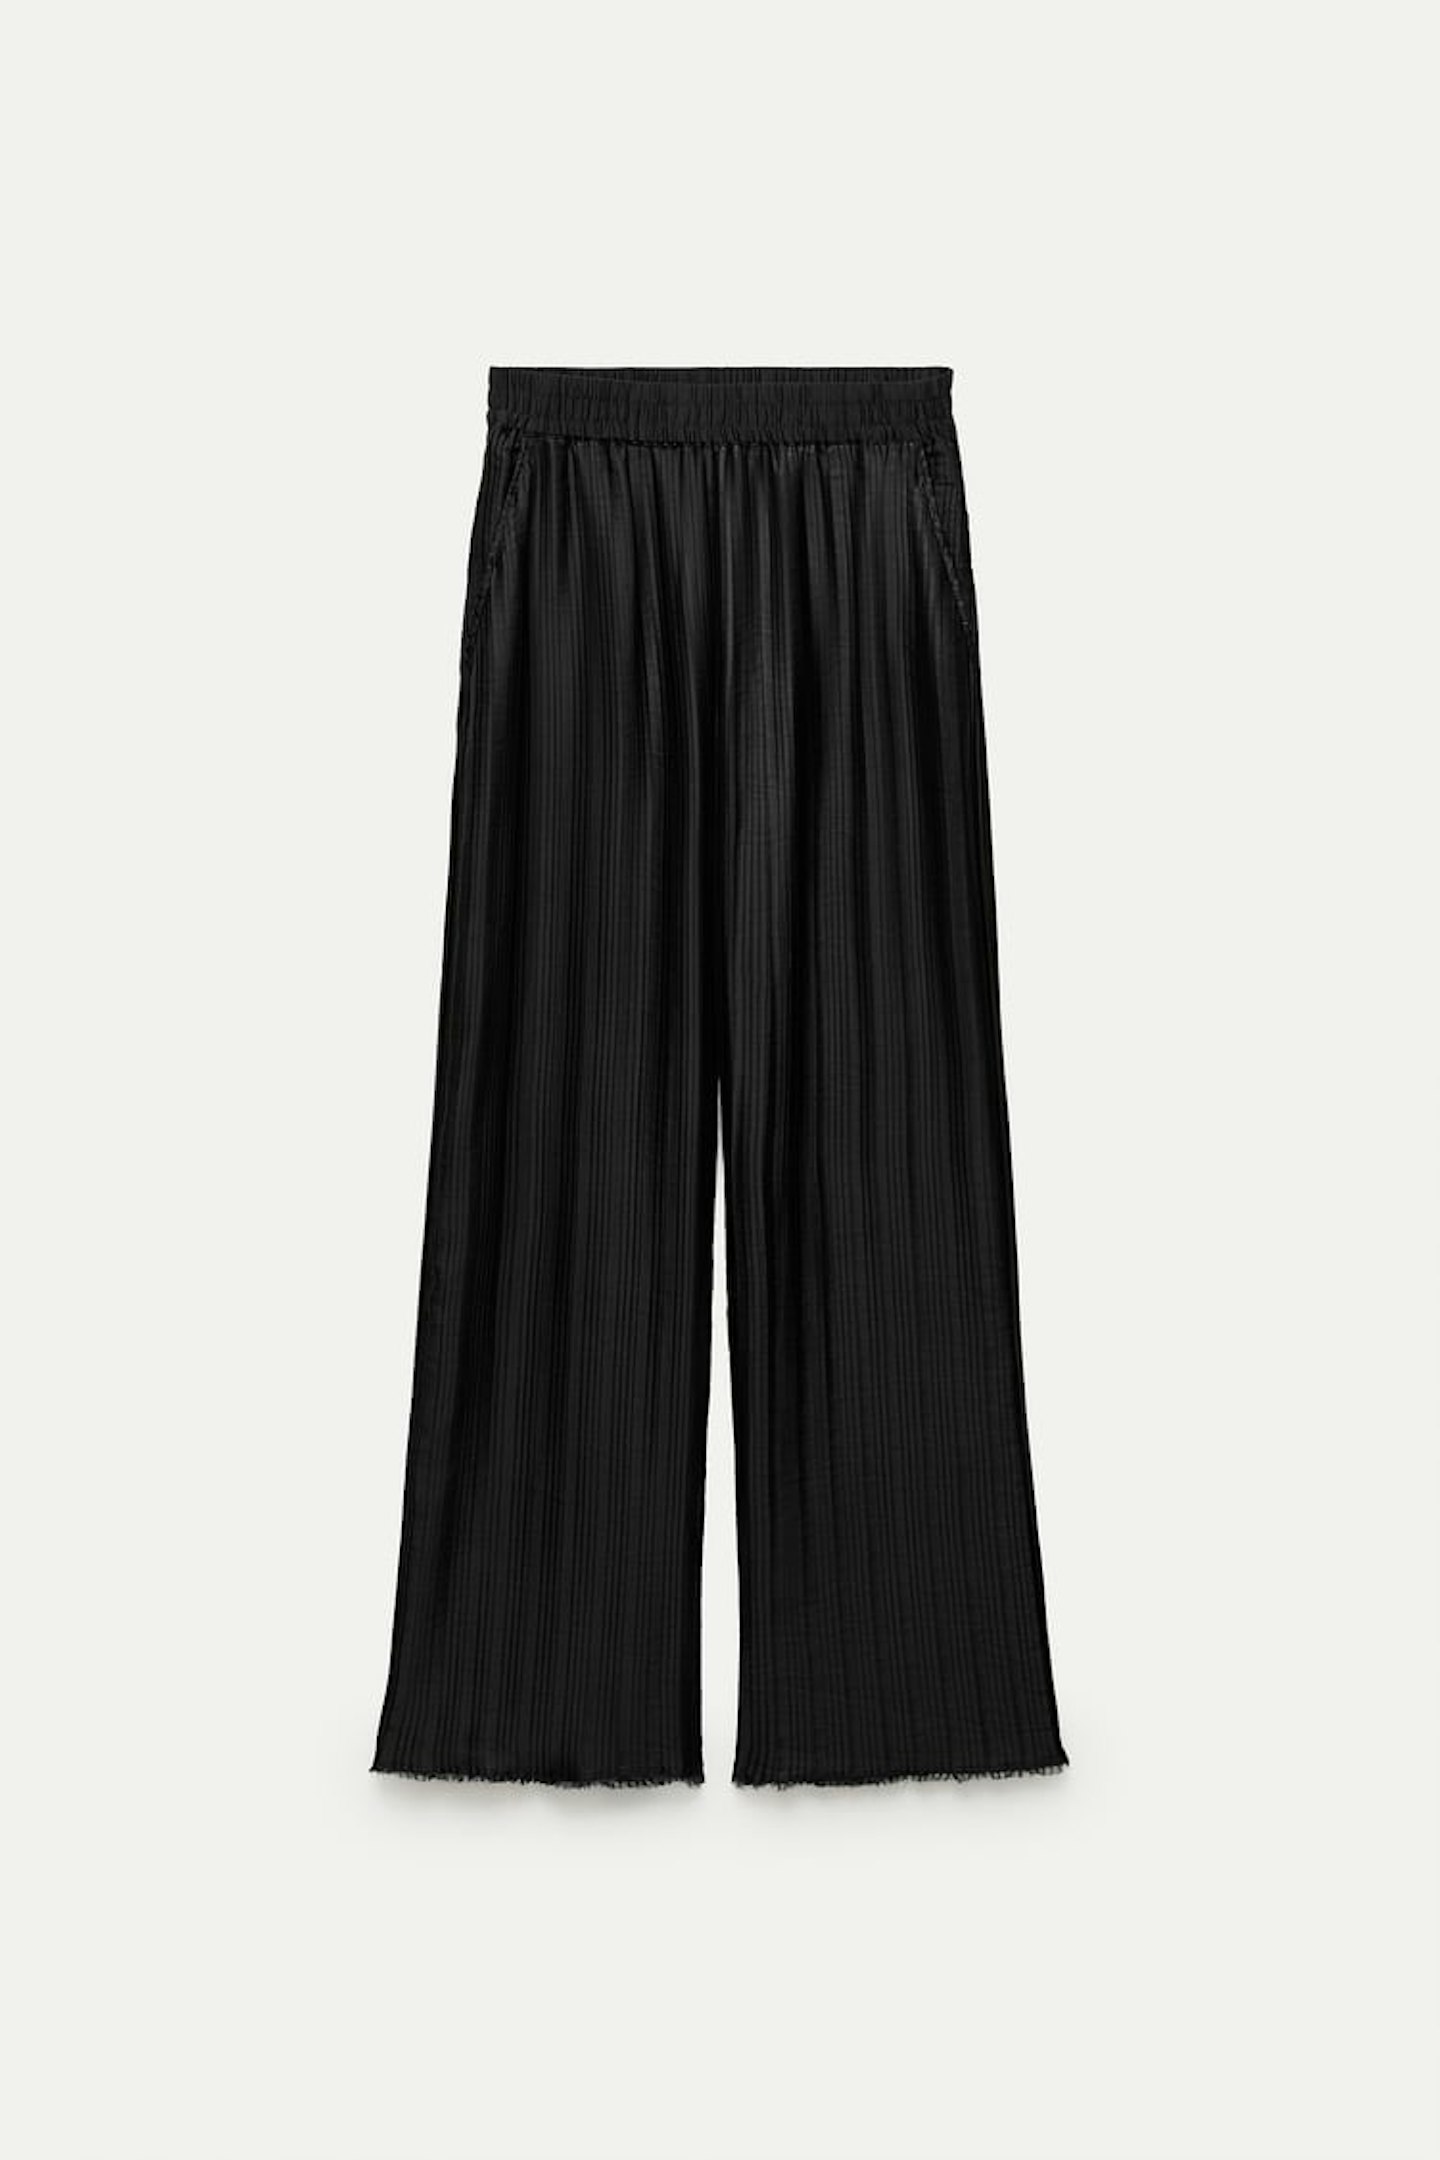 ZW Collection Pleated Trousers